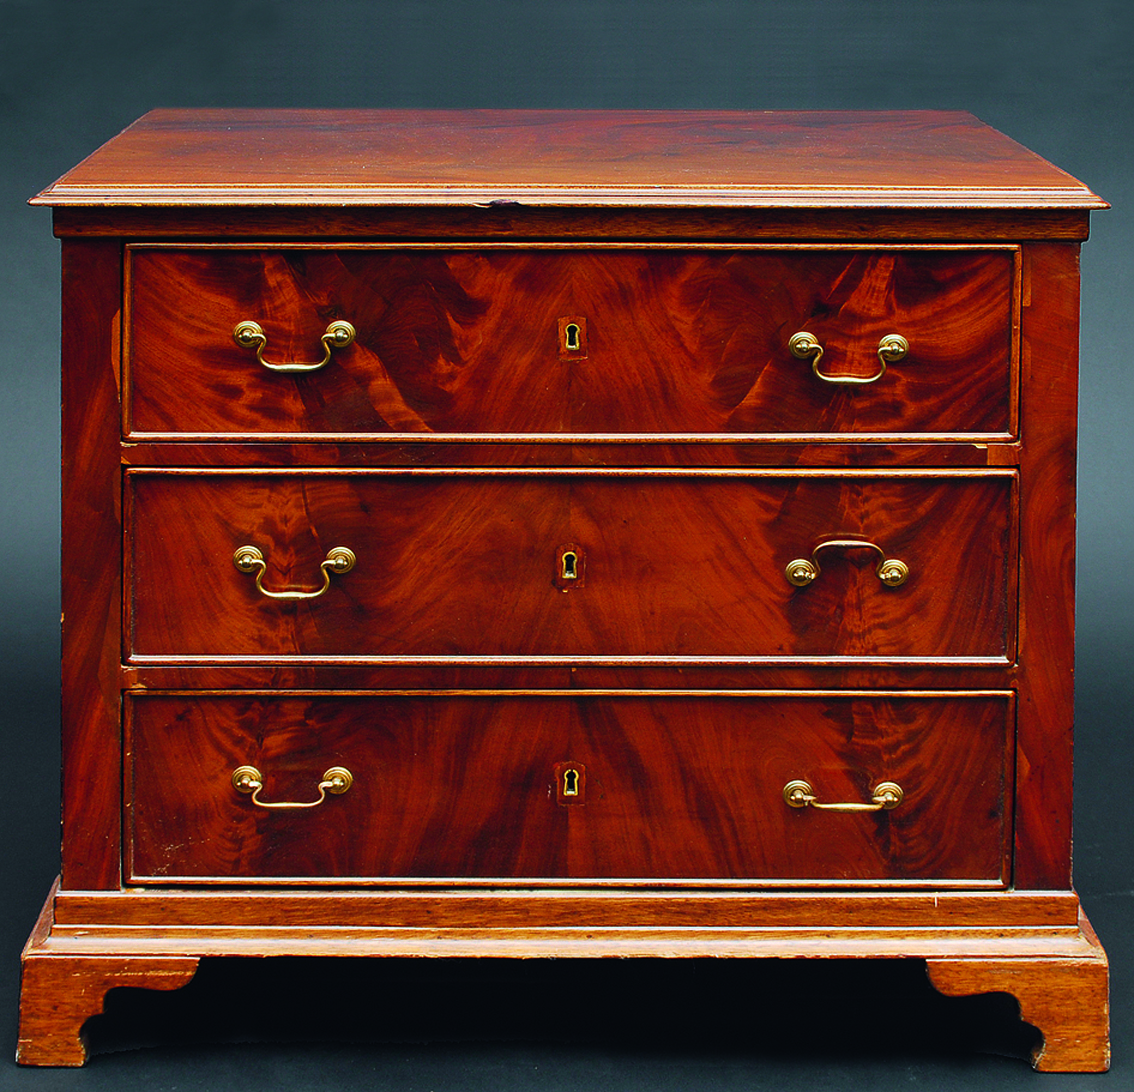 A Regency chest of drawers